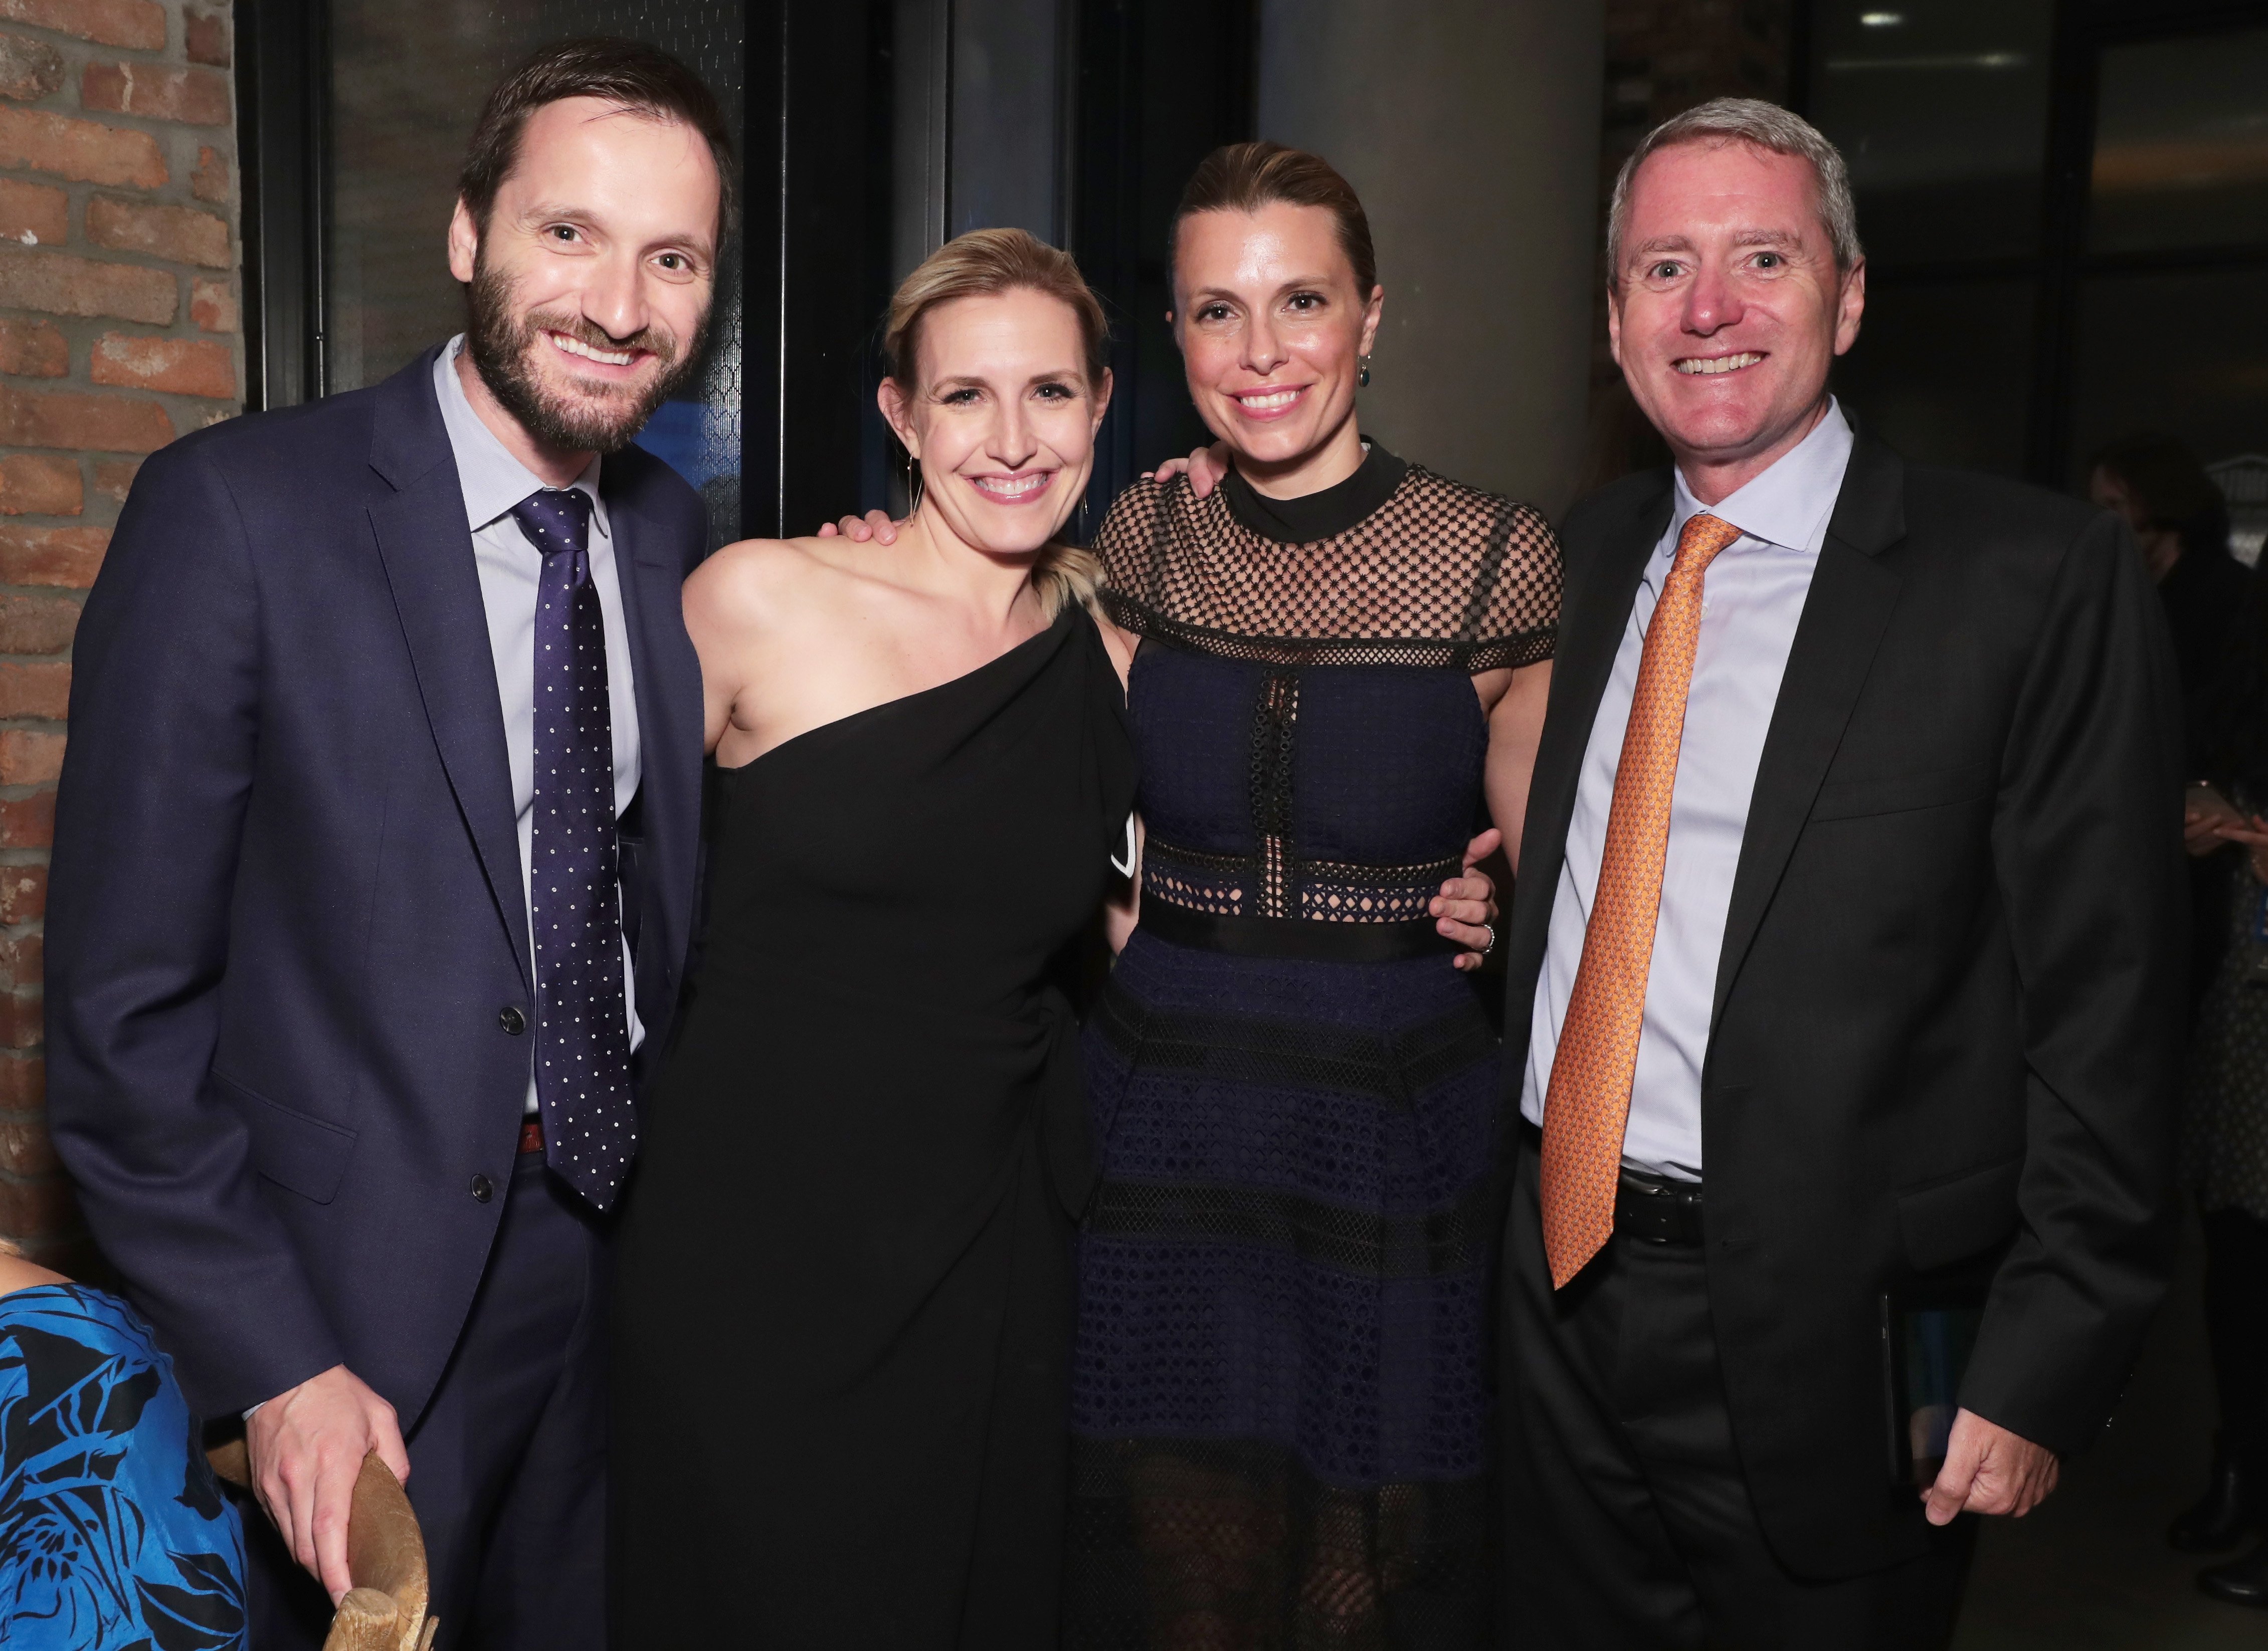 (L-R) Sinisa Babcic, Poppy Harlow, Amy Powell, and John Wood attend the 2018 Room to Read New York Gala on, May 17, 2018 at, Kimpton Hotel Eventi, in New York City. | Source: Getty Images